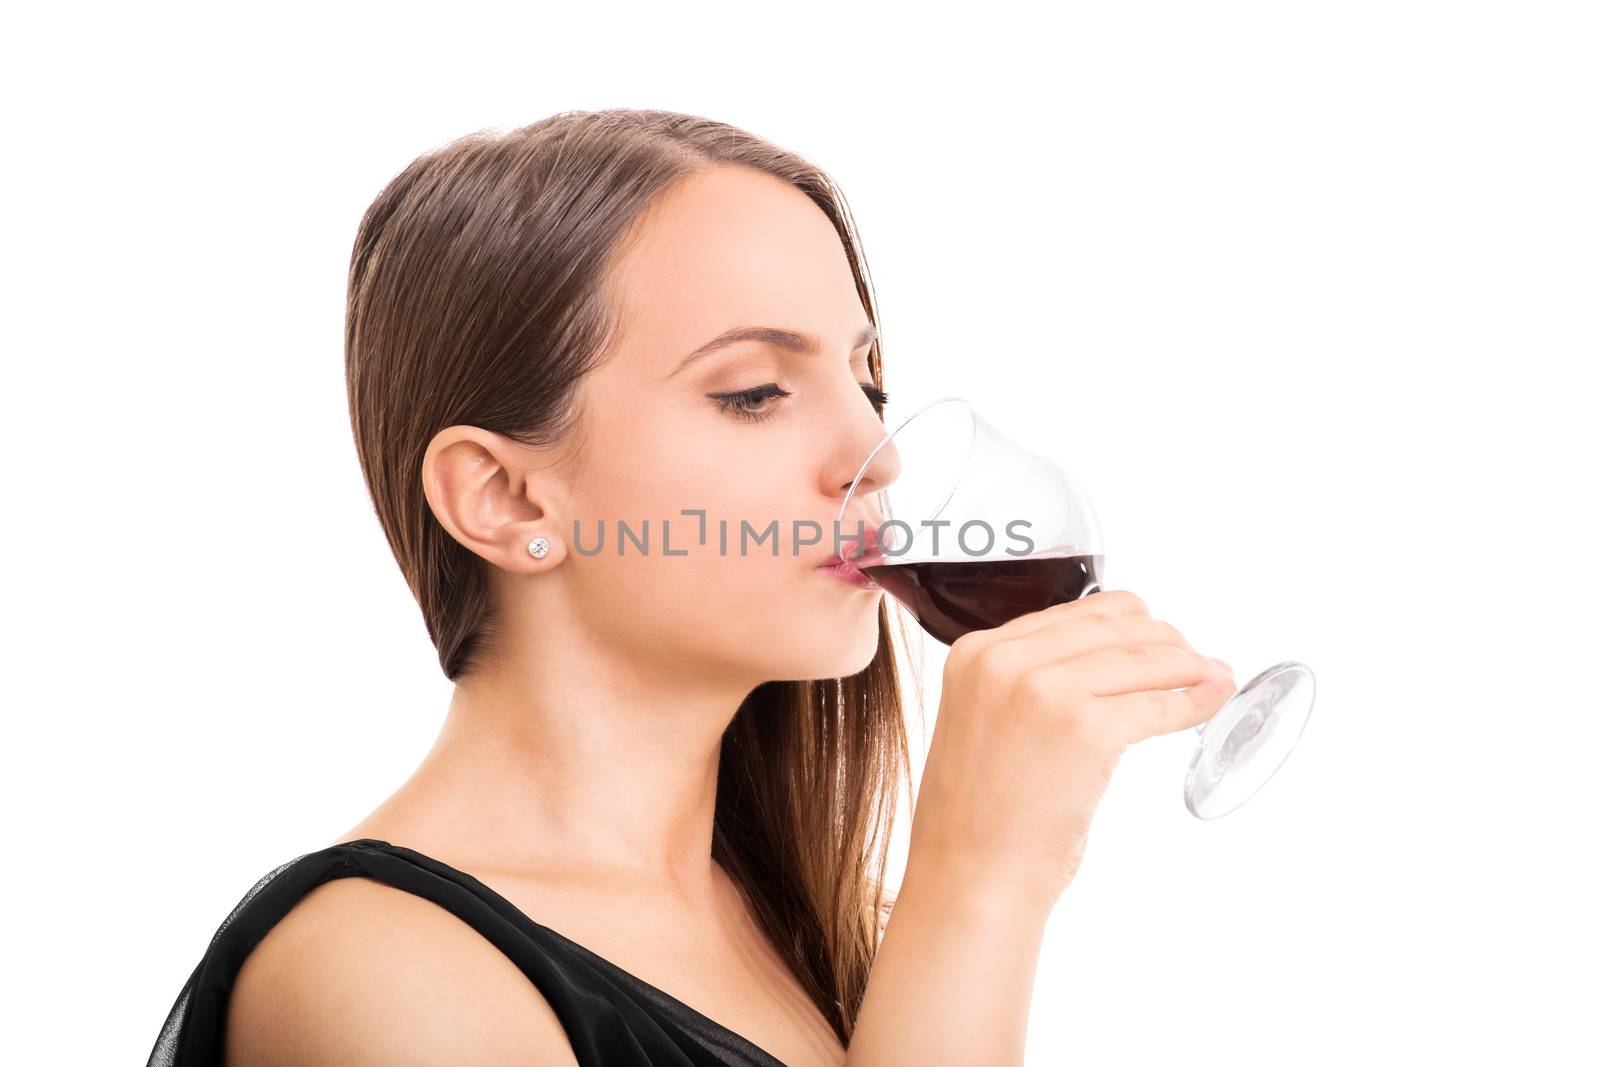 Beautiful young woman taking a sip of a wine glass, isolated on white background.